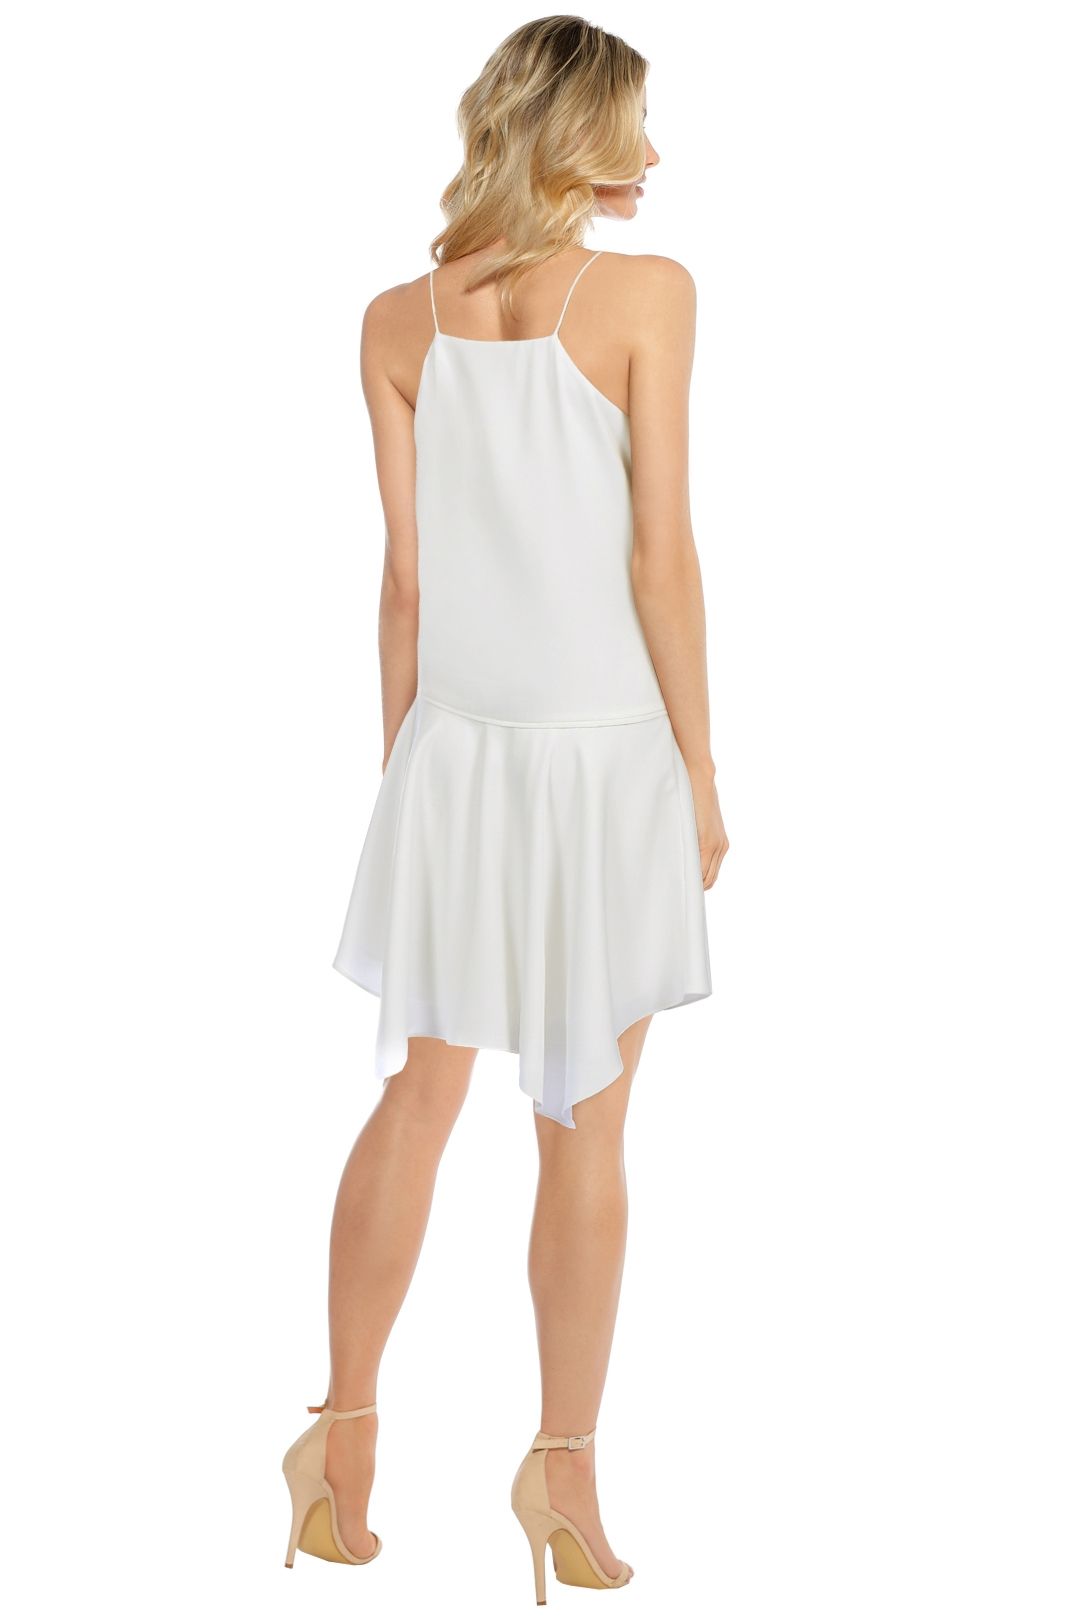 Camilla and Marc - Ripolin Dress - White - Front